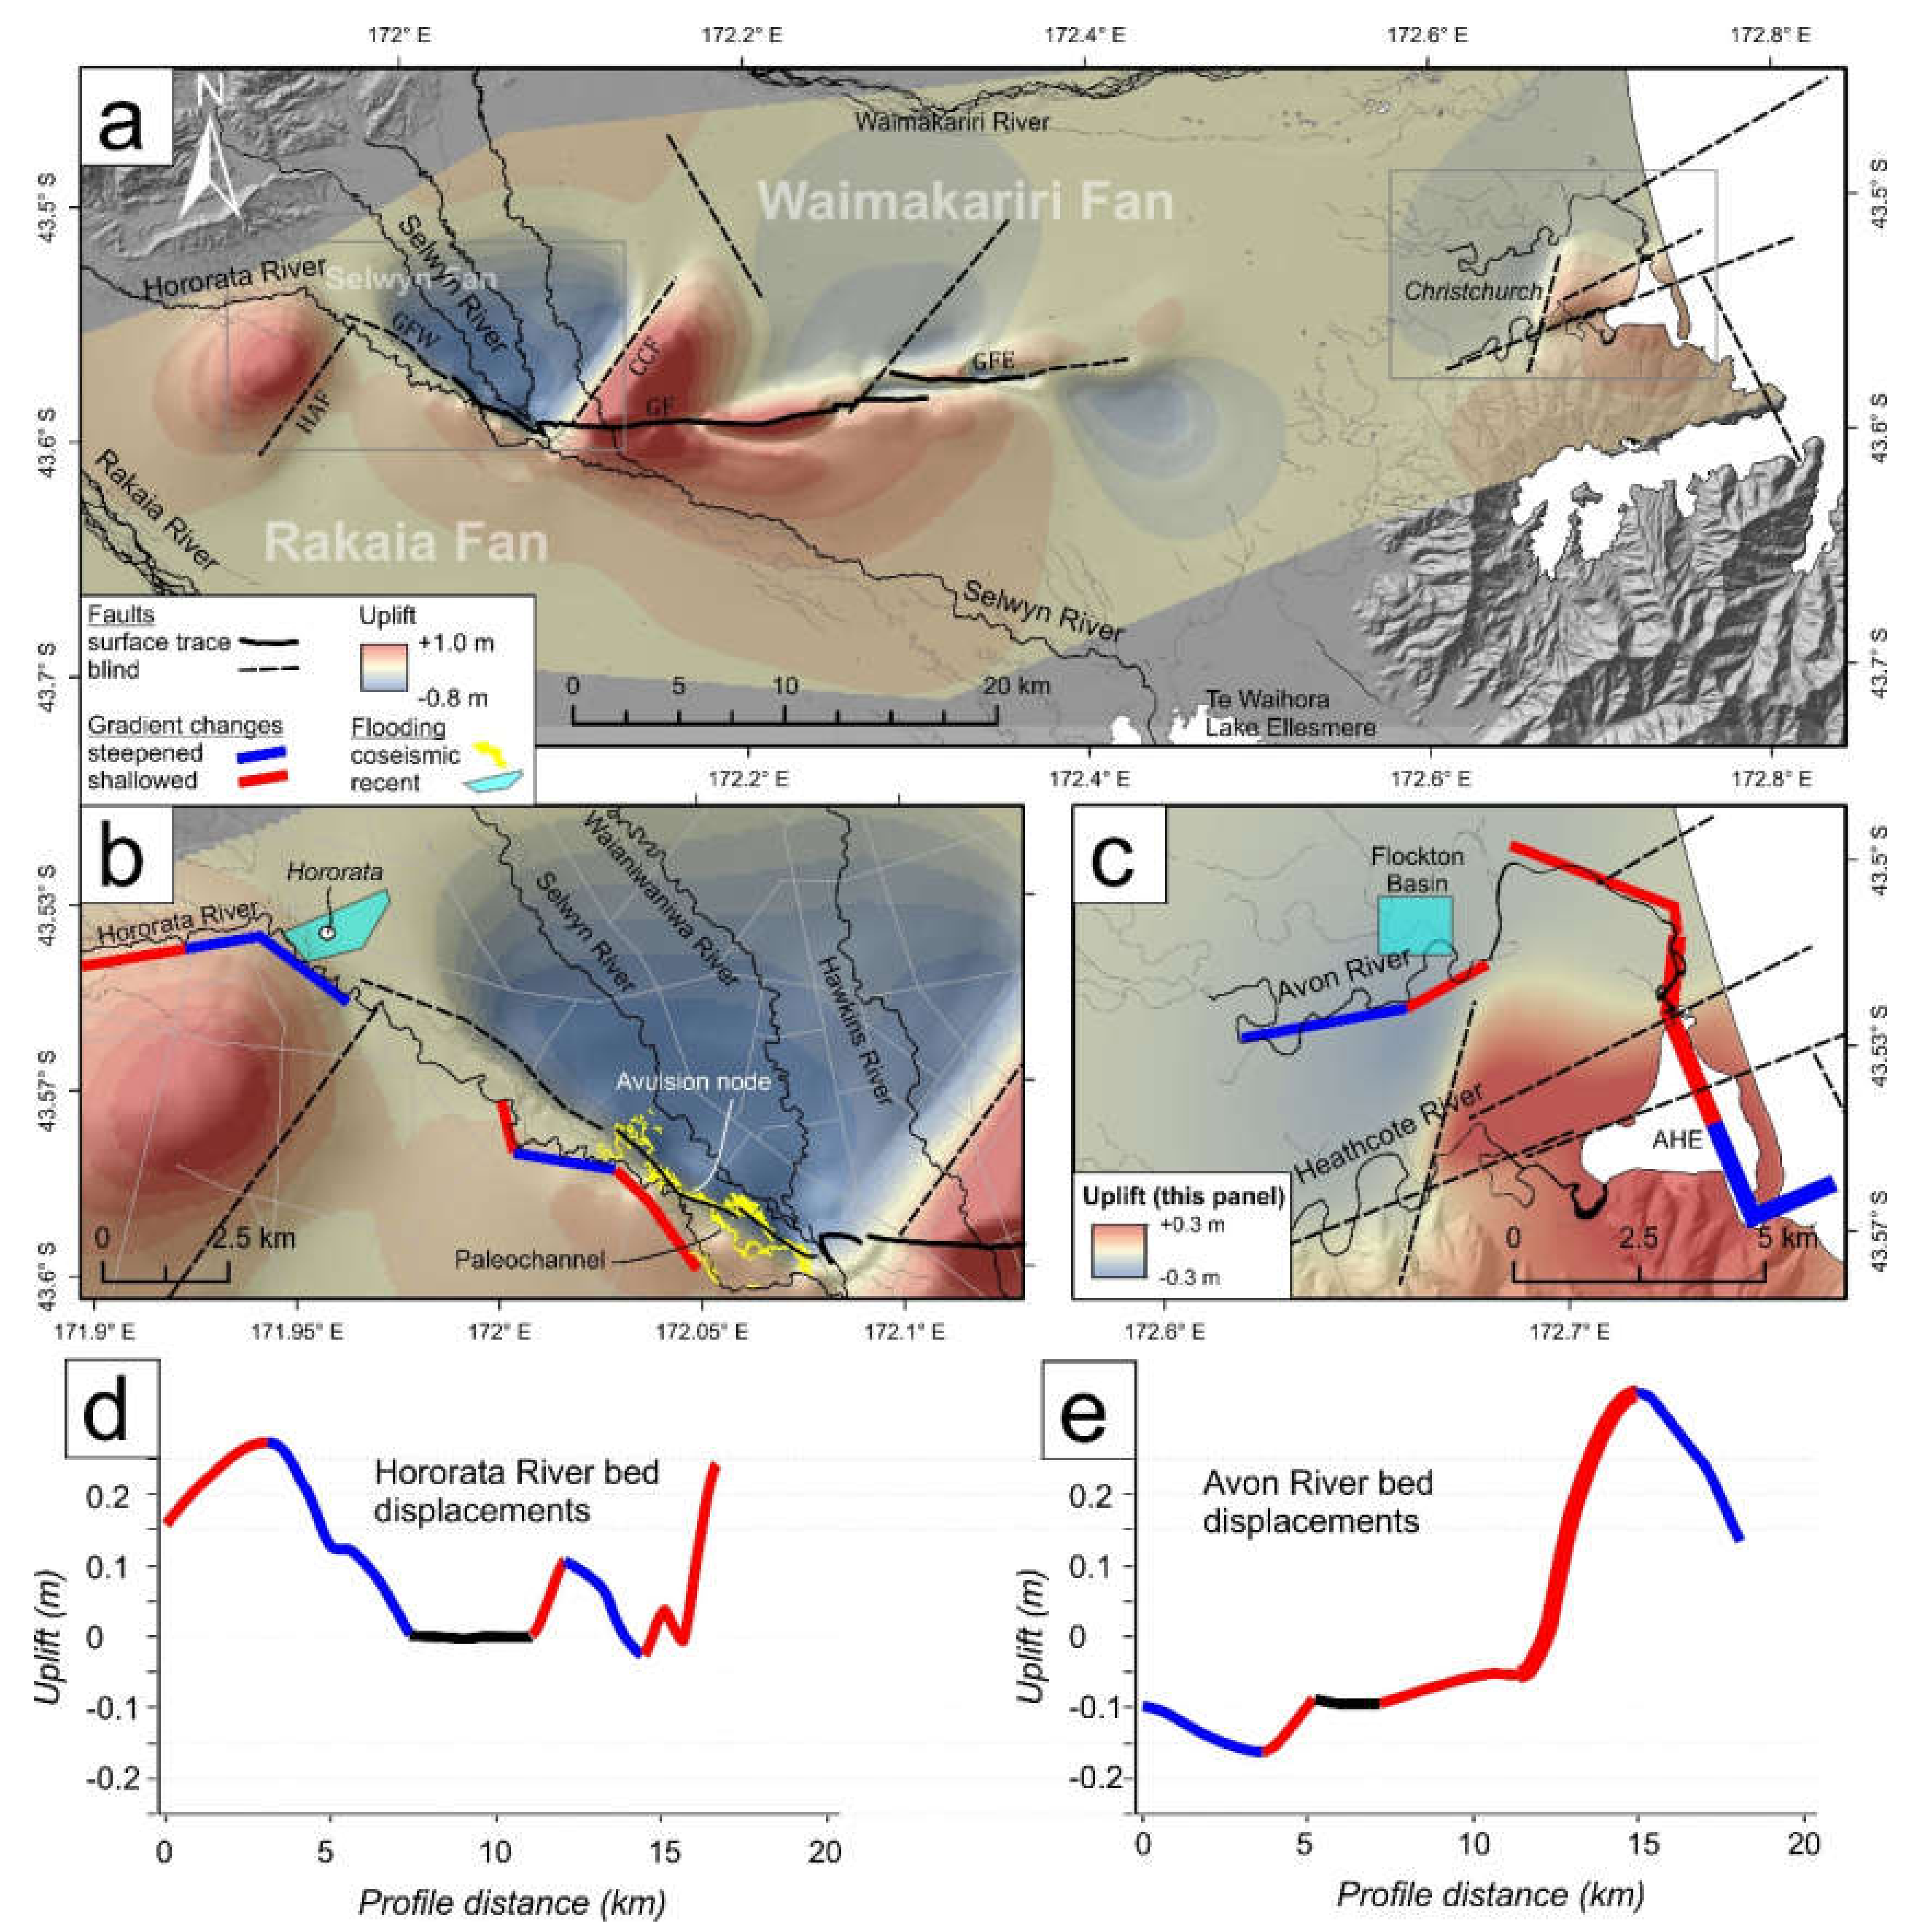 Geosciences | Free Full-Text | Effects of Earthquakes on Flood Hazards: A  Case Study From Christchurch, New Zealand | HTML